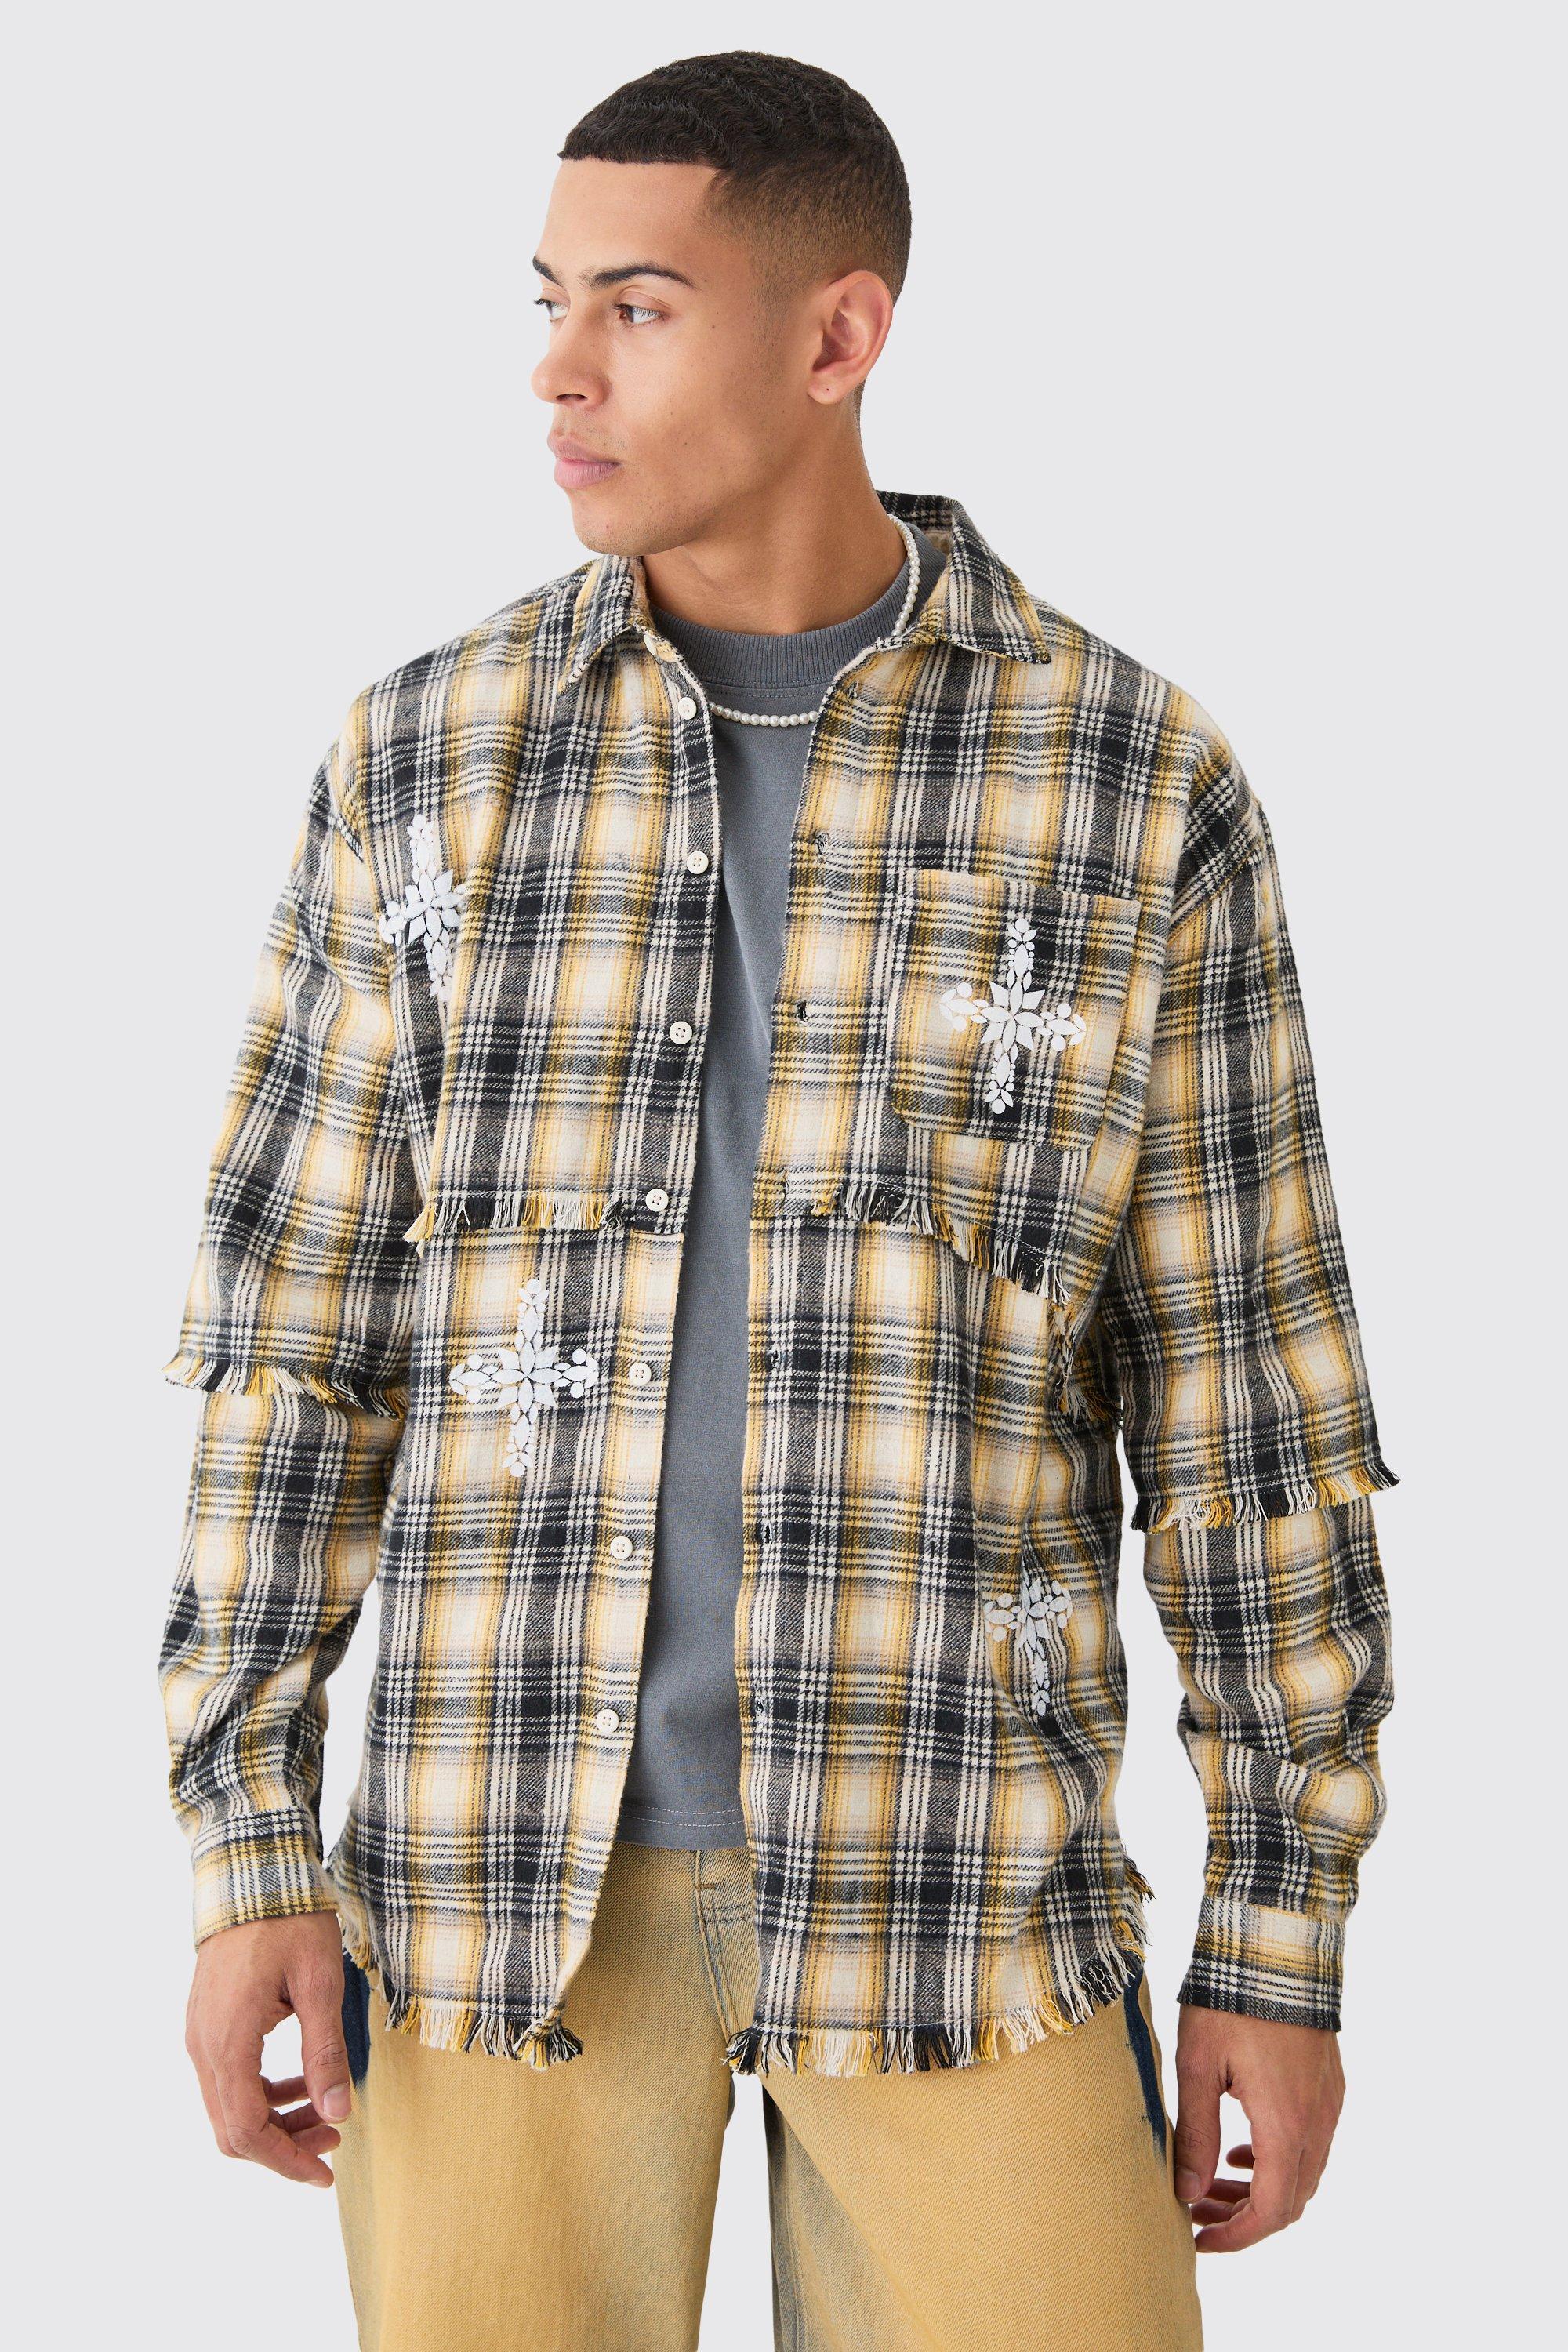 BoohooMAN Oversized Layered Print Flannel Shirt in Yellow for Men